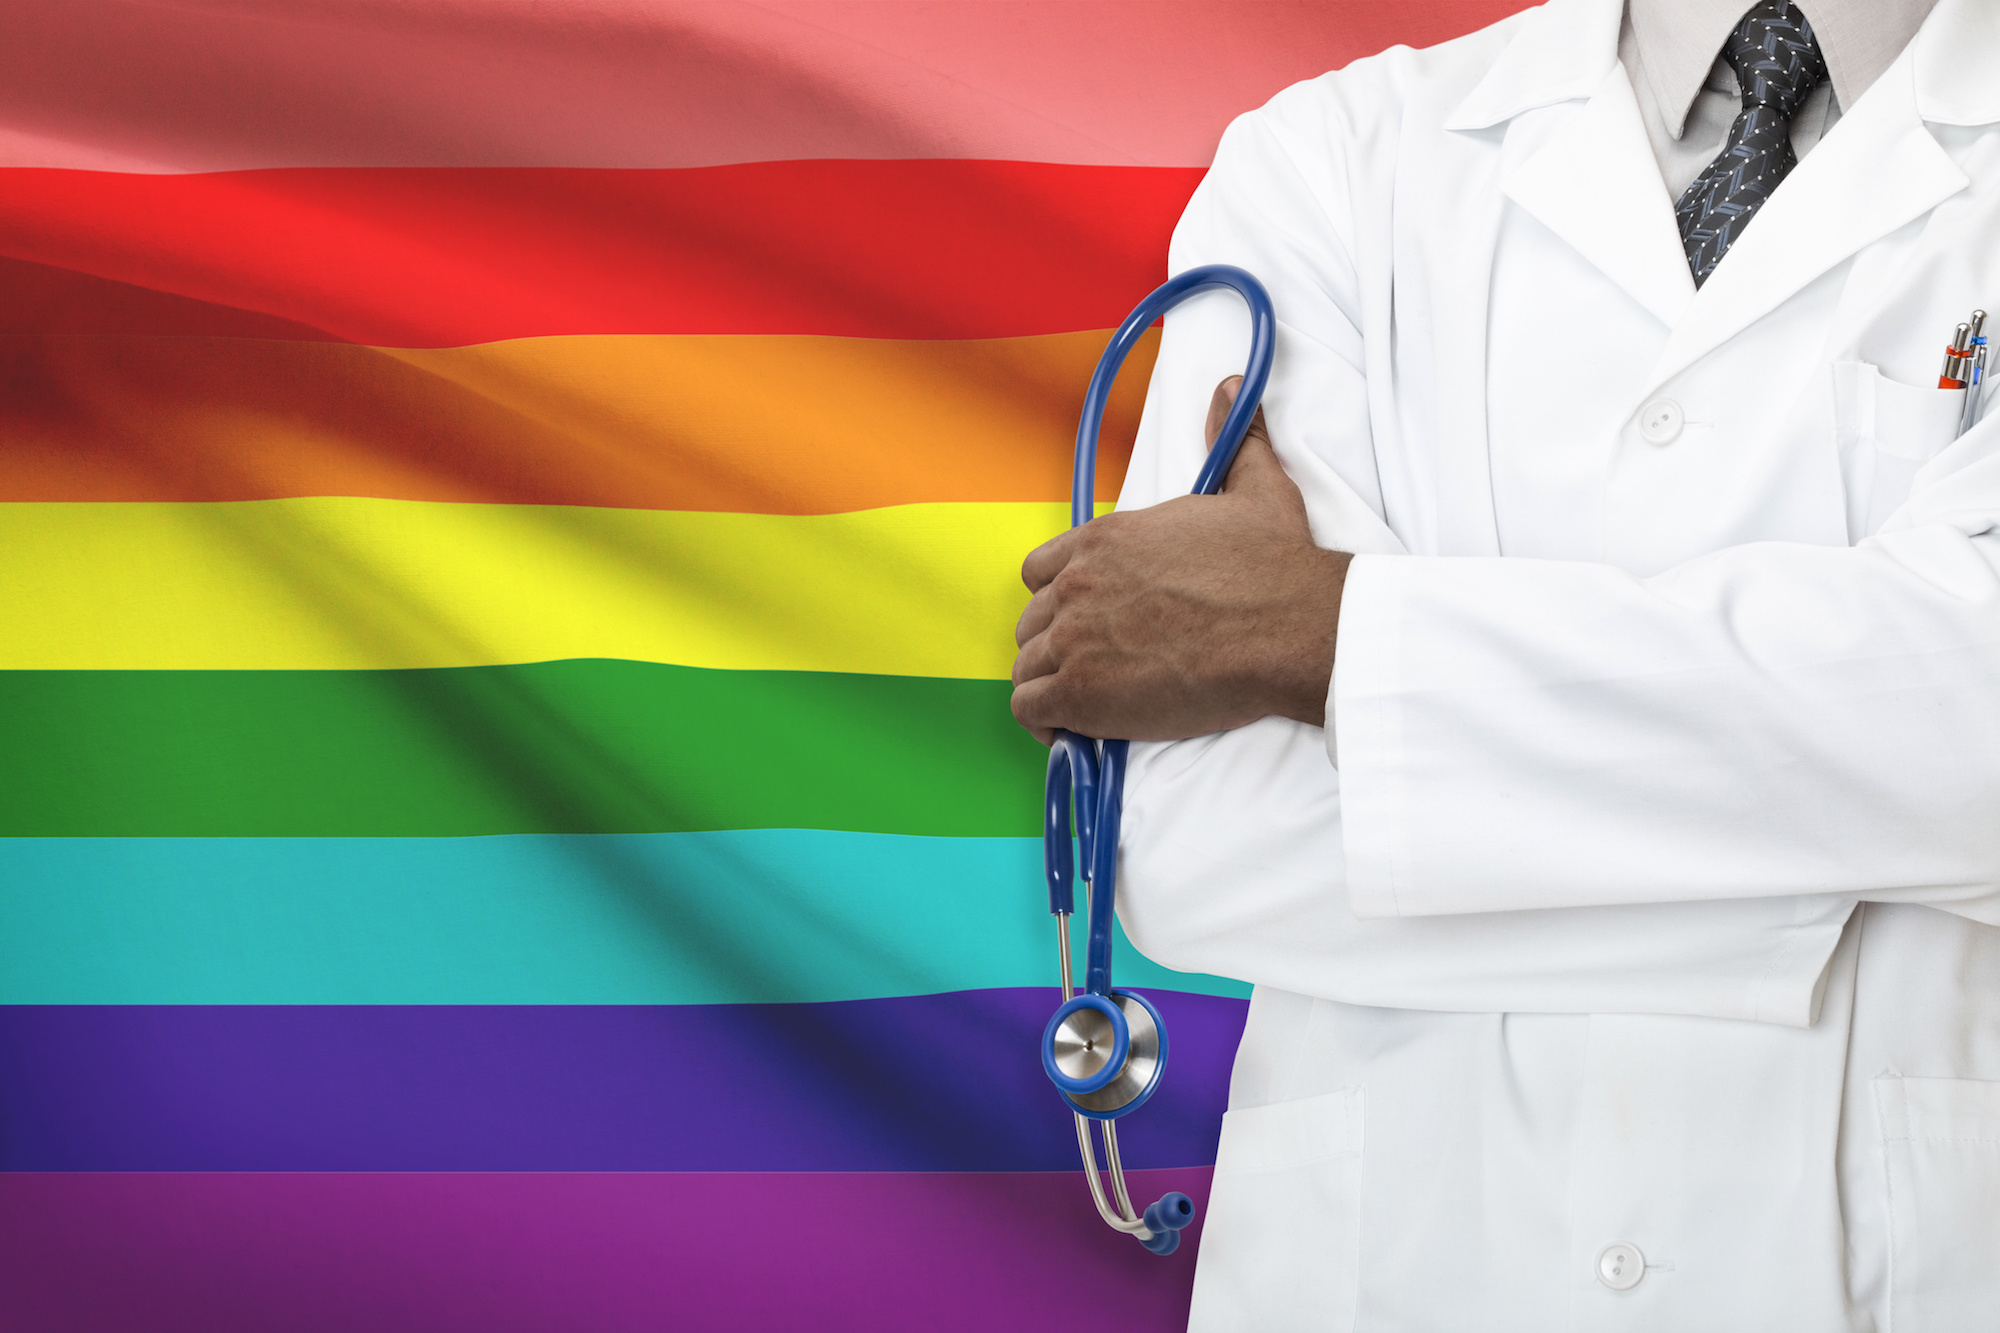 make your practice LGBT friendly